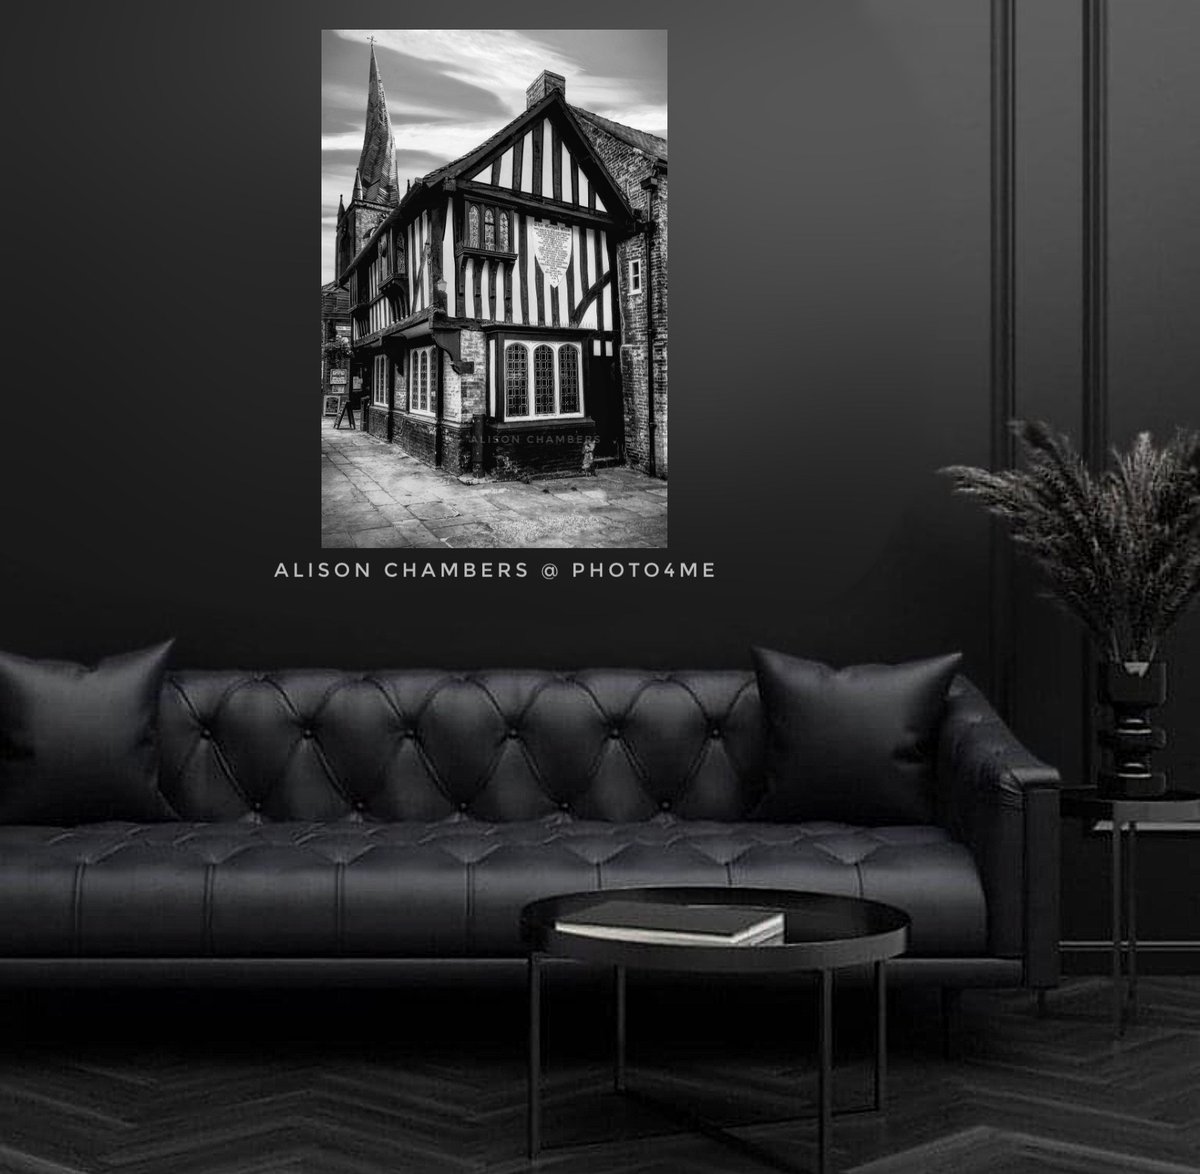 🖤Historic Chesterfield©️. Available from; shop.photo4me.com/1304668 & alisonchambers2.redbubble.com & 2-alison-chambers.pixels.com #chesterfield #ChesterfieldEvents #chesterfieldcrookedspire #crookedspire #chesterfielduk